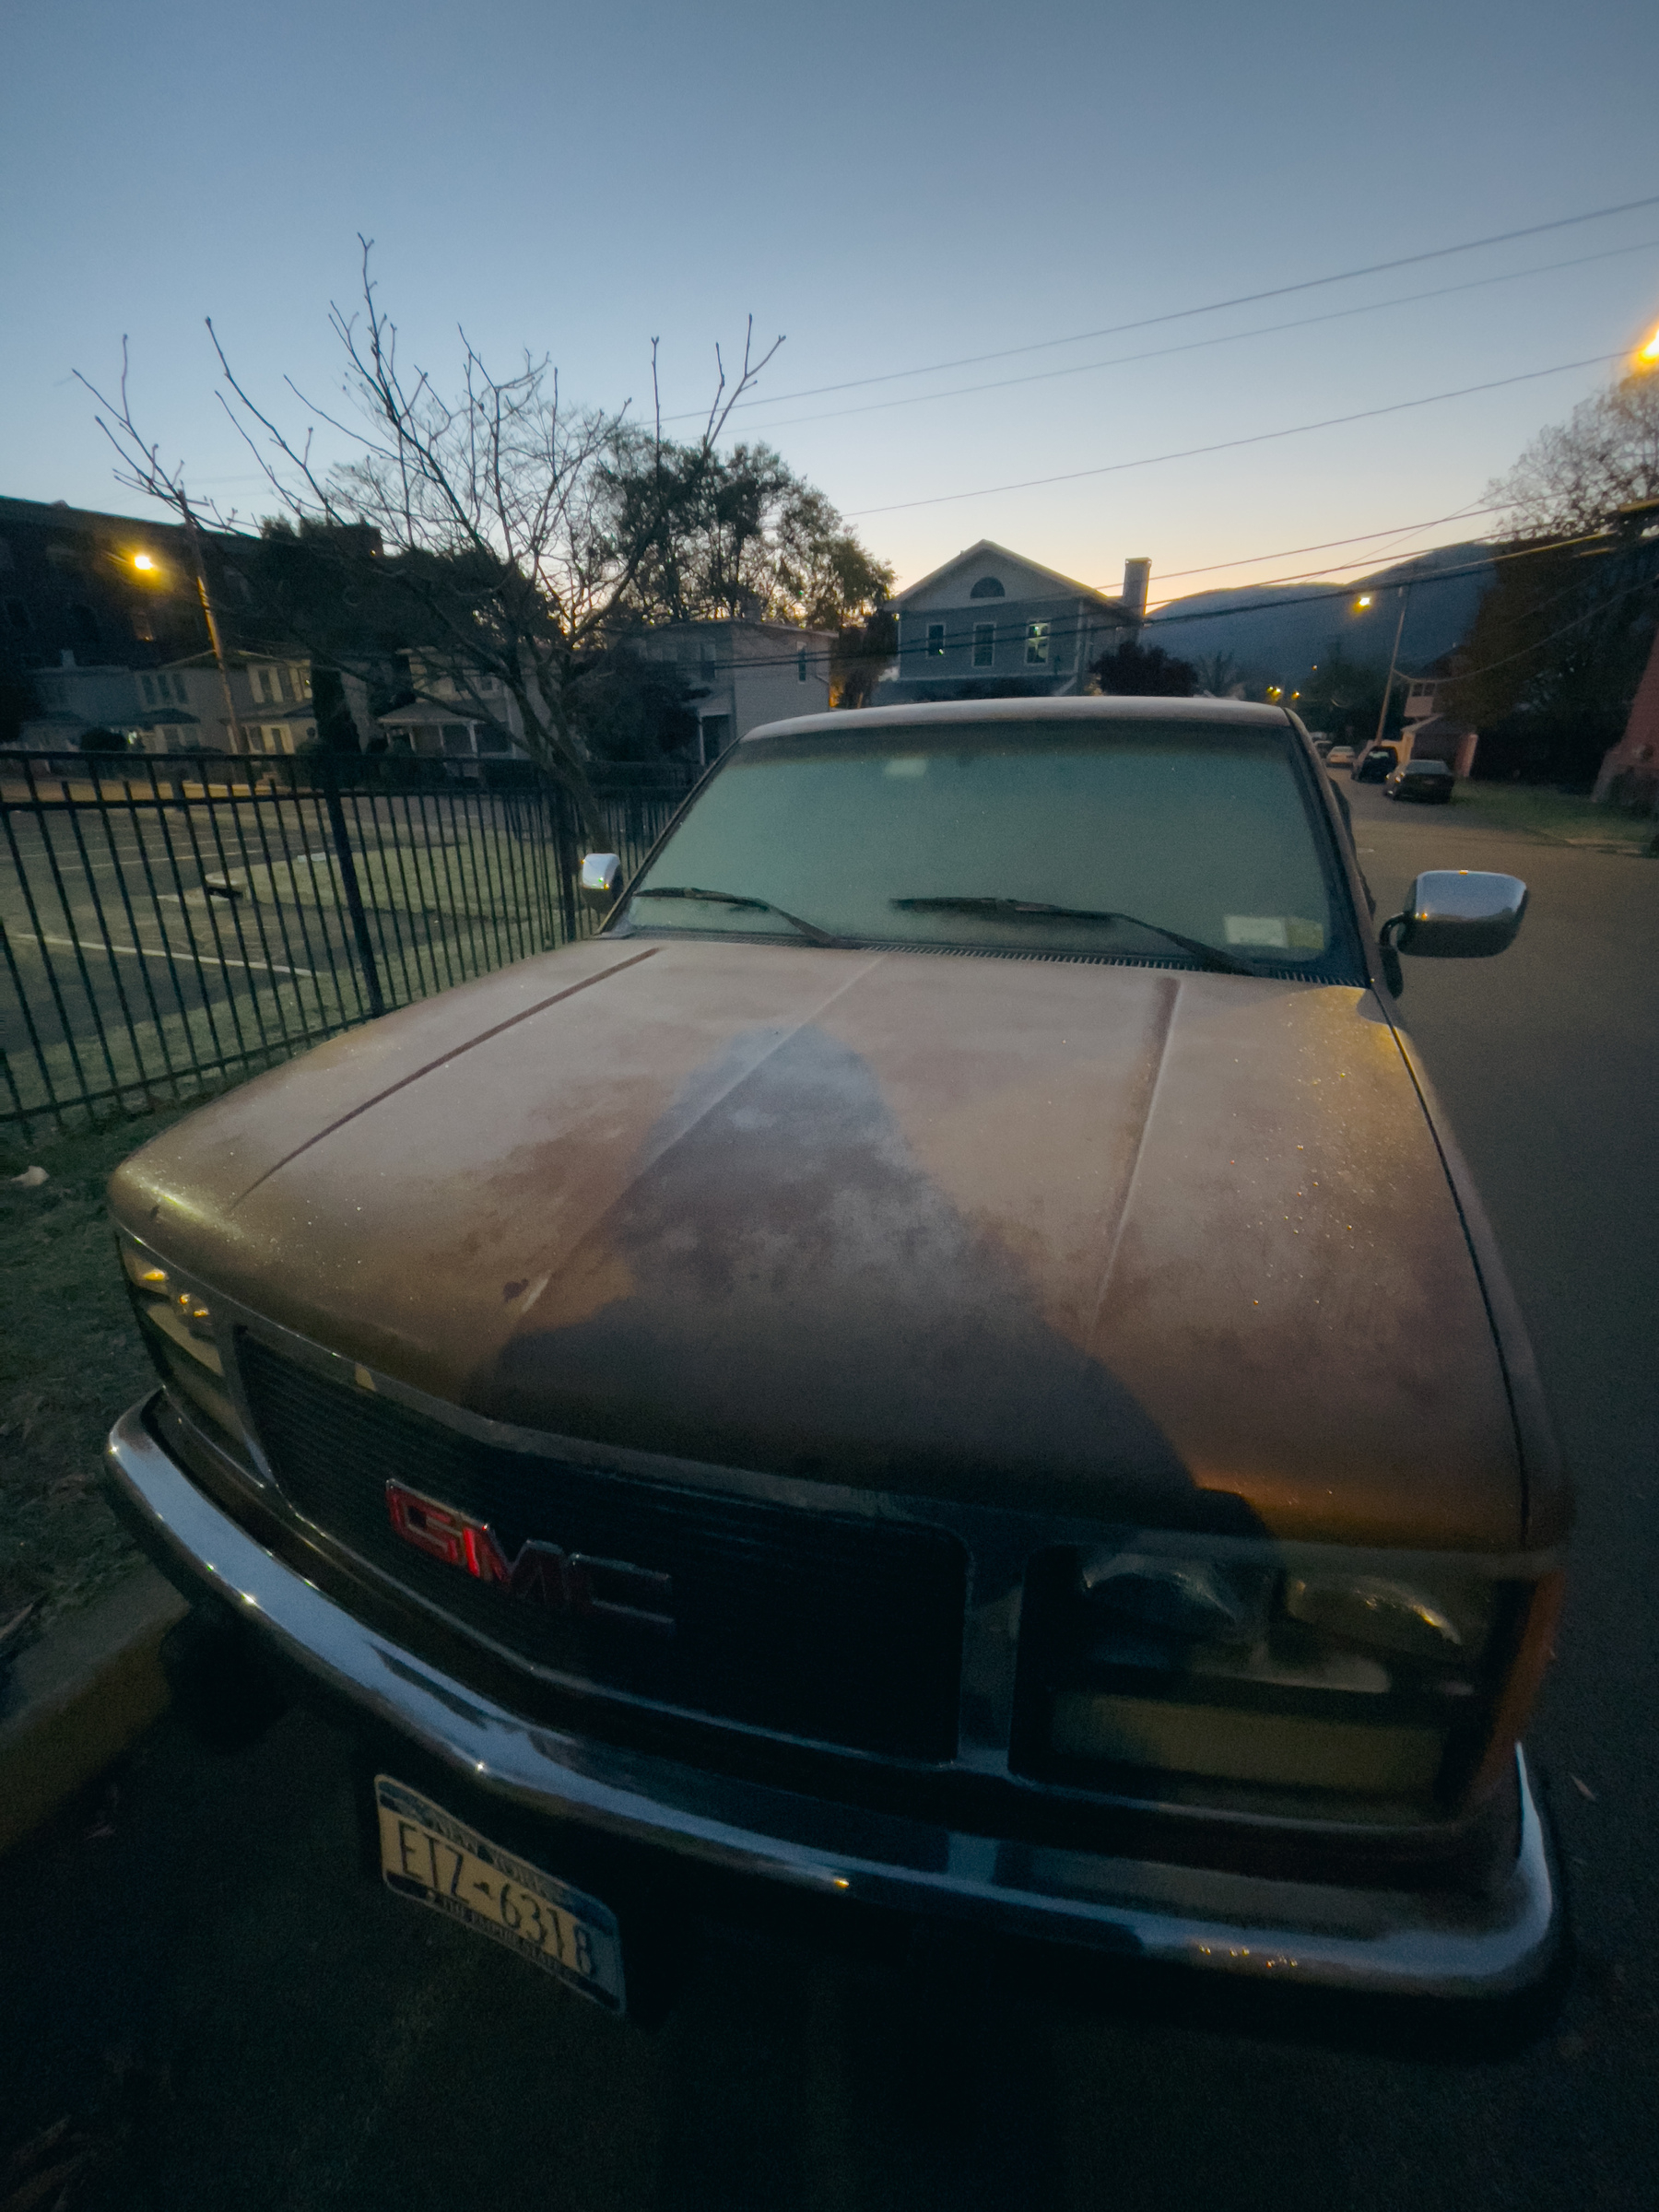 Wide angle view of old pickup truck with frost on hood and windshield and dawn sky in distance.